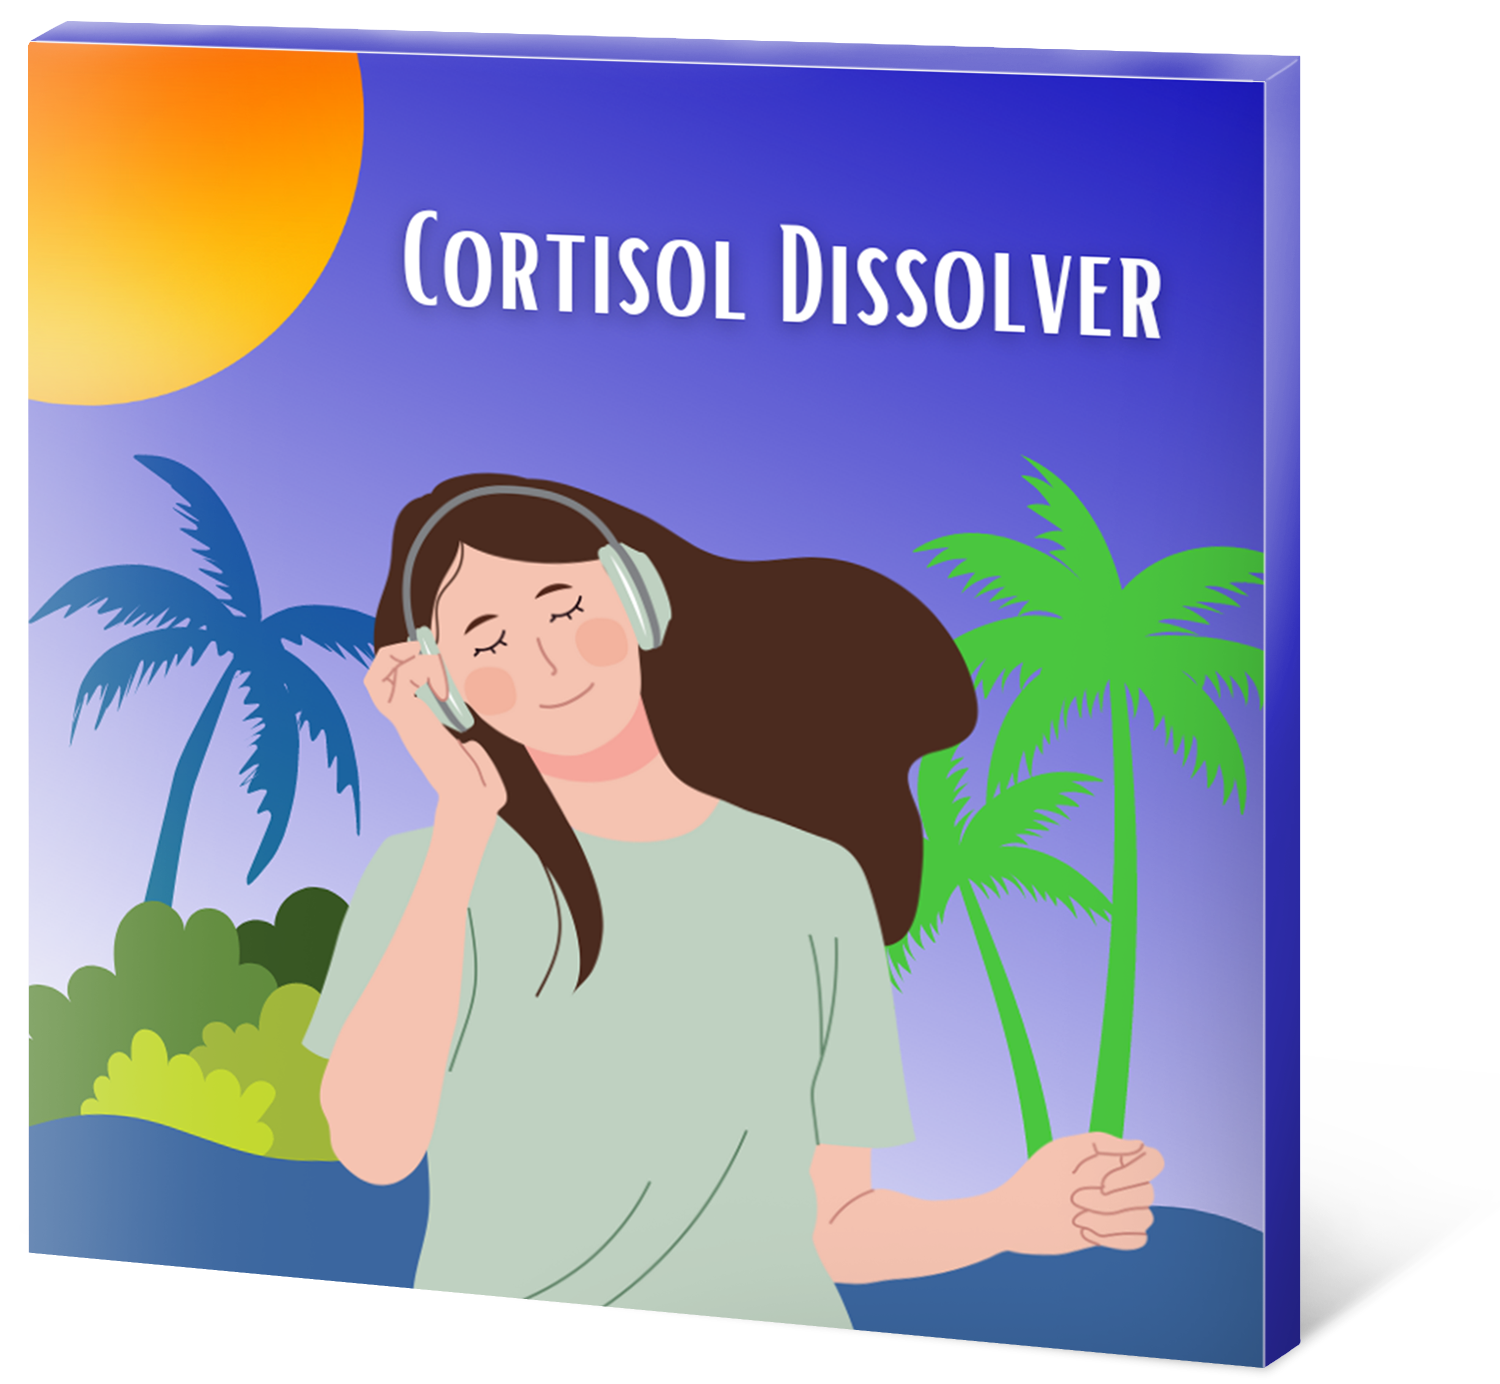 product cover for cortisol dissolver